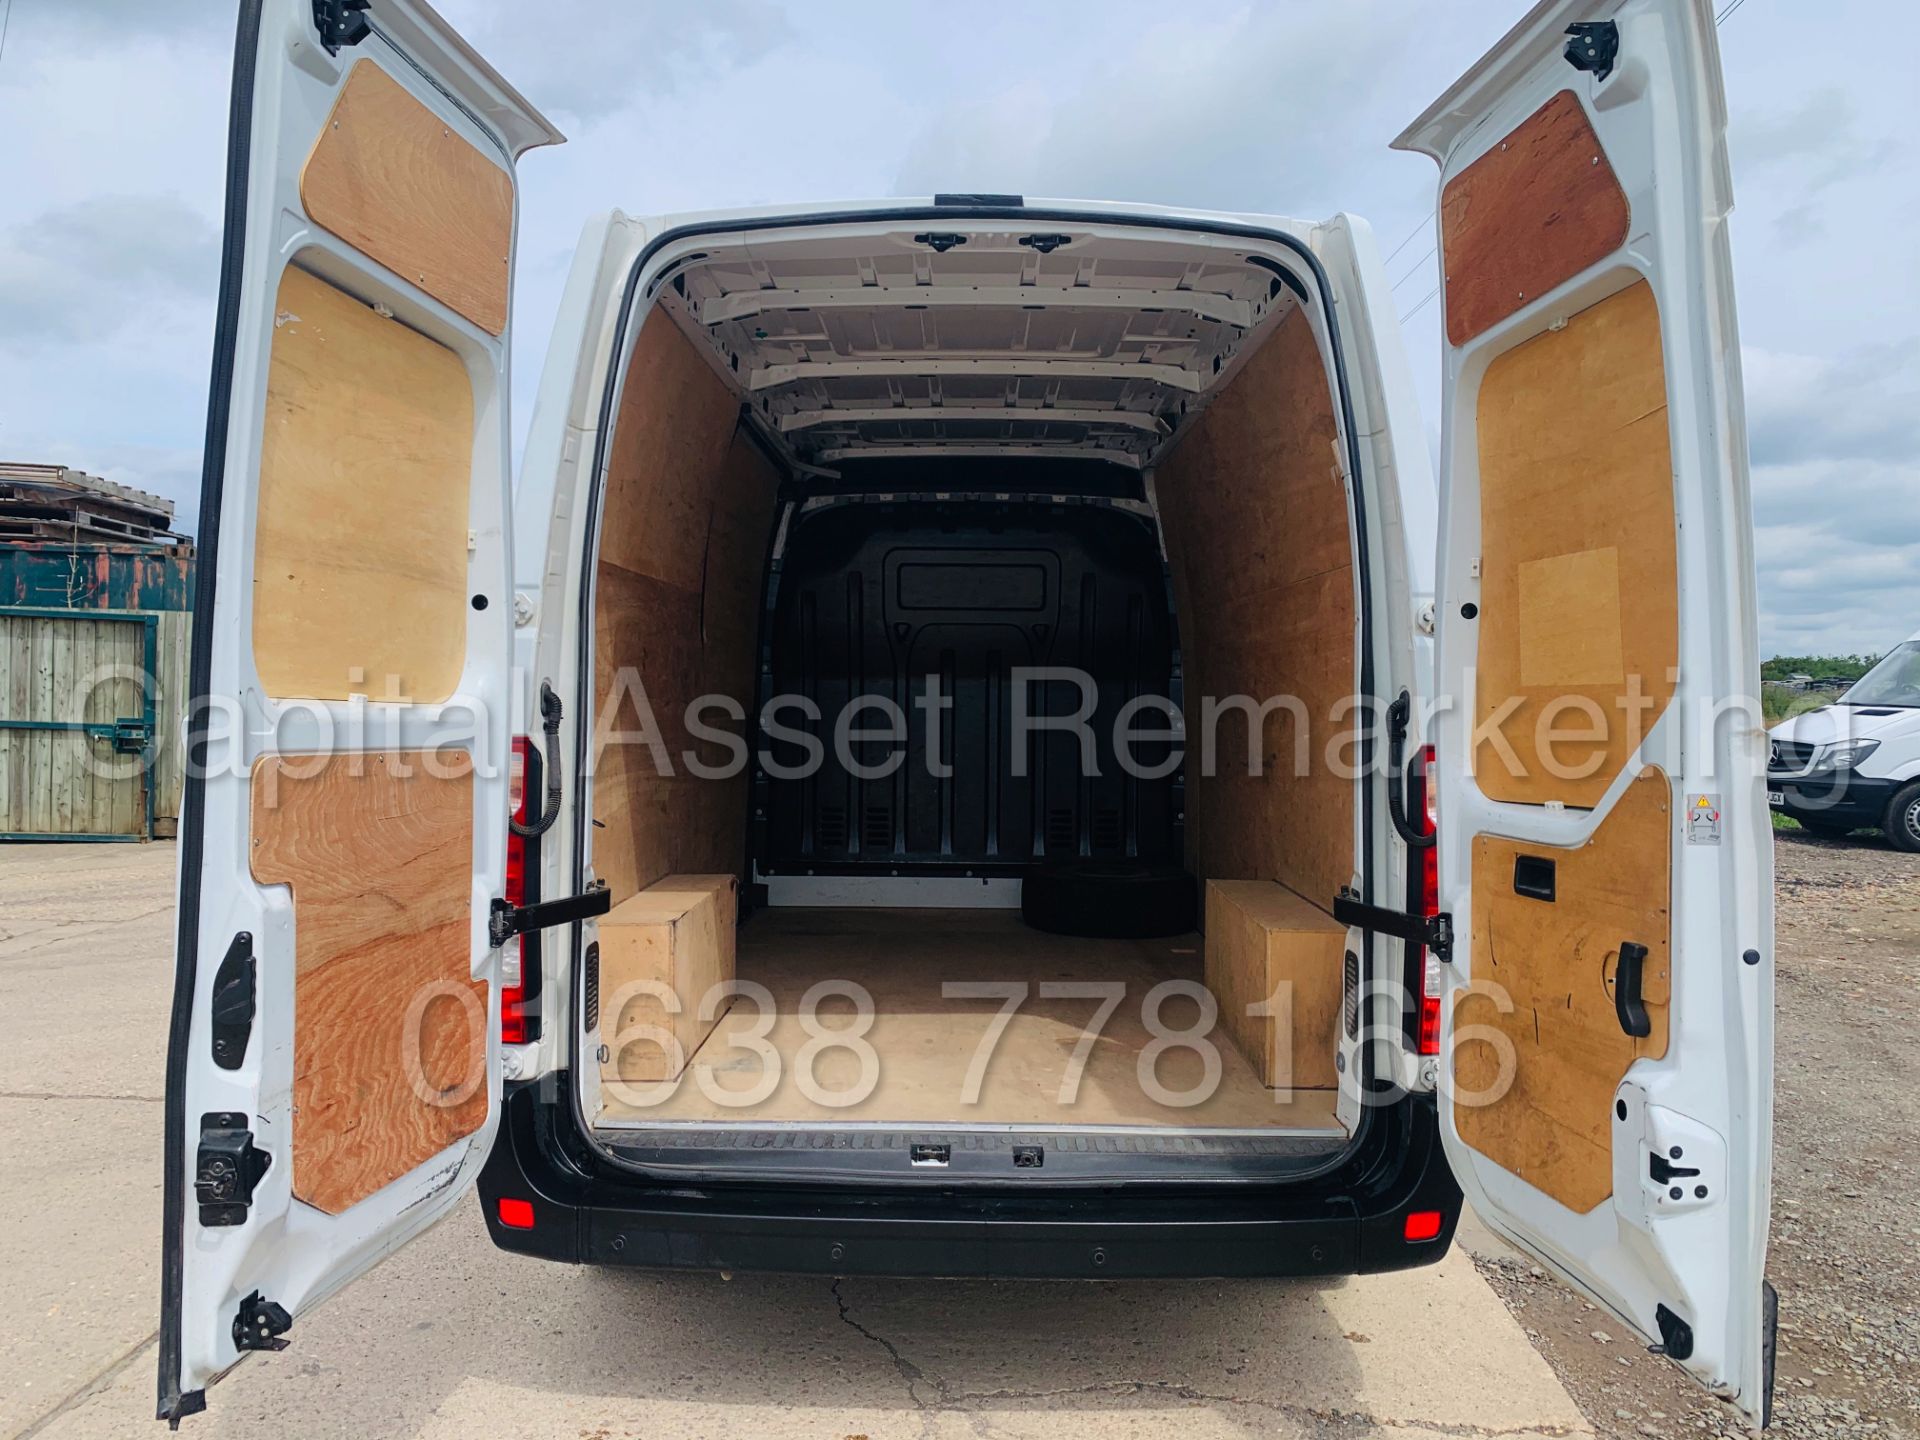 (ON SALE) VAUXHALL MOVANO *MWB HI-ROOF* (2018 - EURO 6) '2.3 CDTI - 130 BHP - 6 SPEED' (1 OWNER) - Image 24 of 39